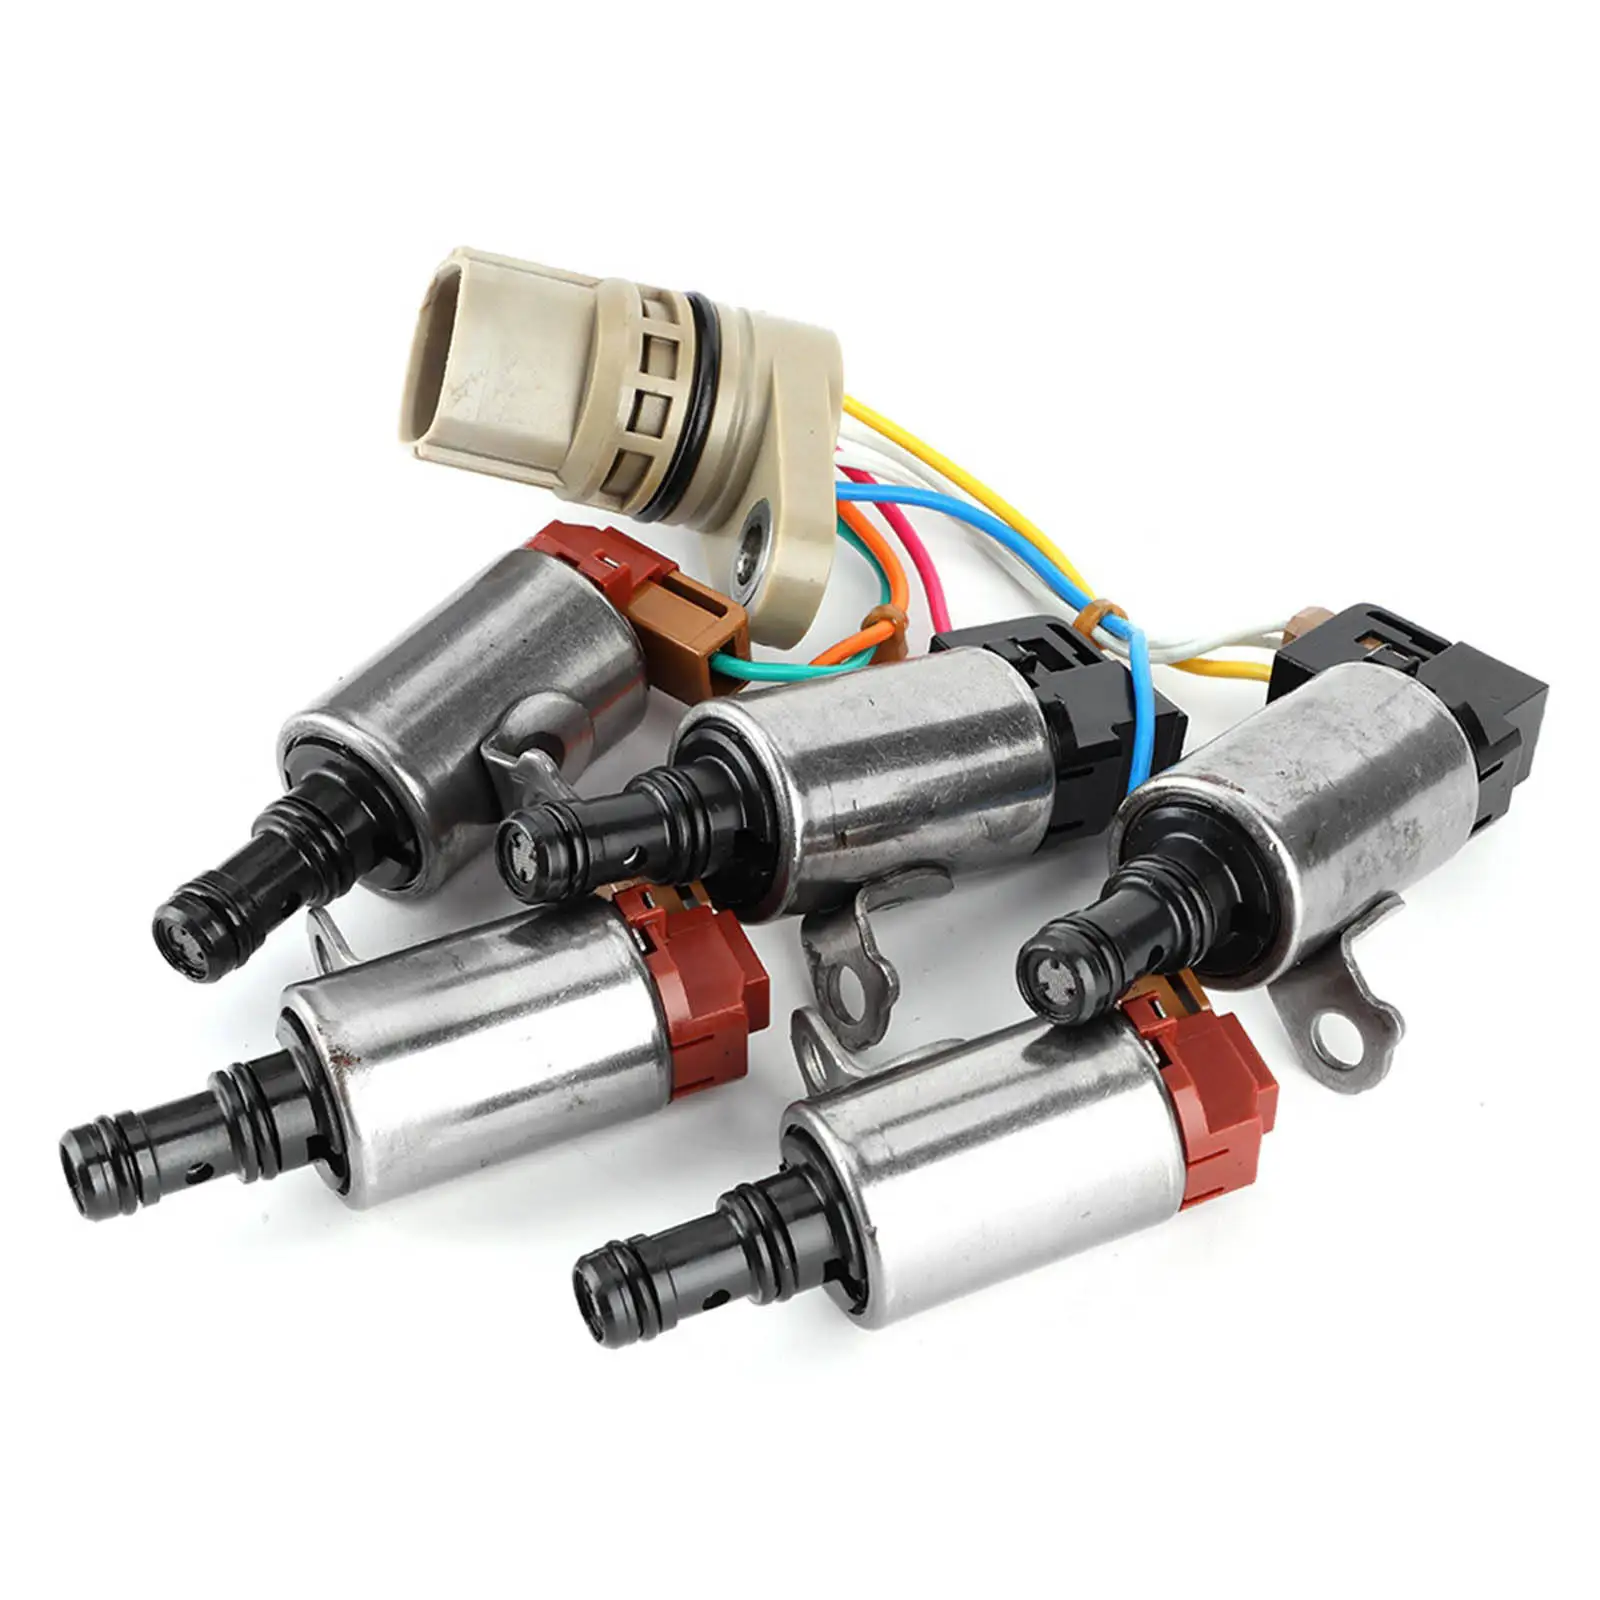 Automatic Durable Transmission Master Solenoid Set for Honda Accord  2012-2015 2002-2014 2007-2011 Replaces Accessories